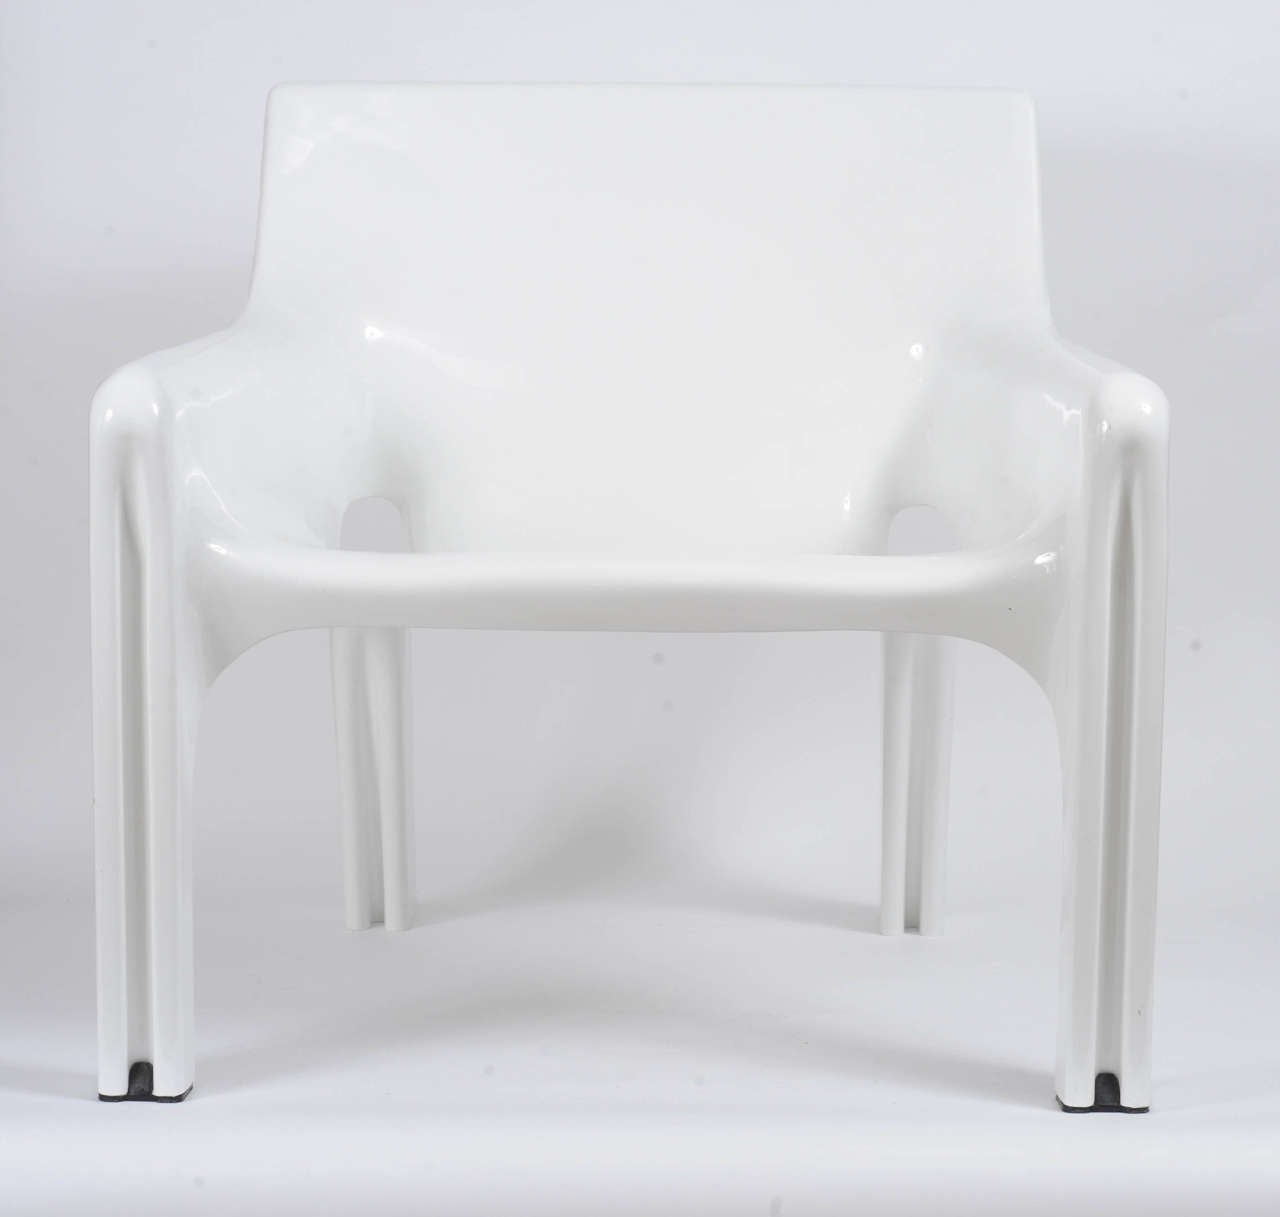 The Vicario chair was designed in 1972 by Vico Magistretti for Artemide.